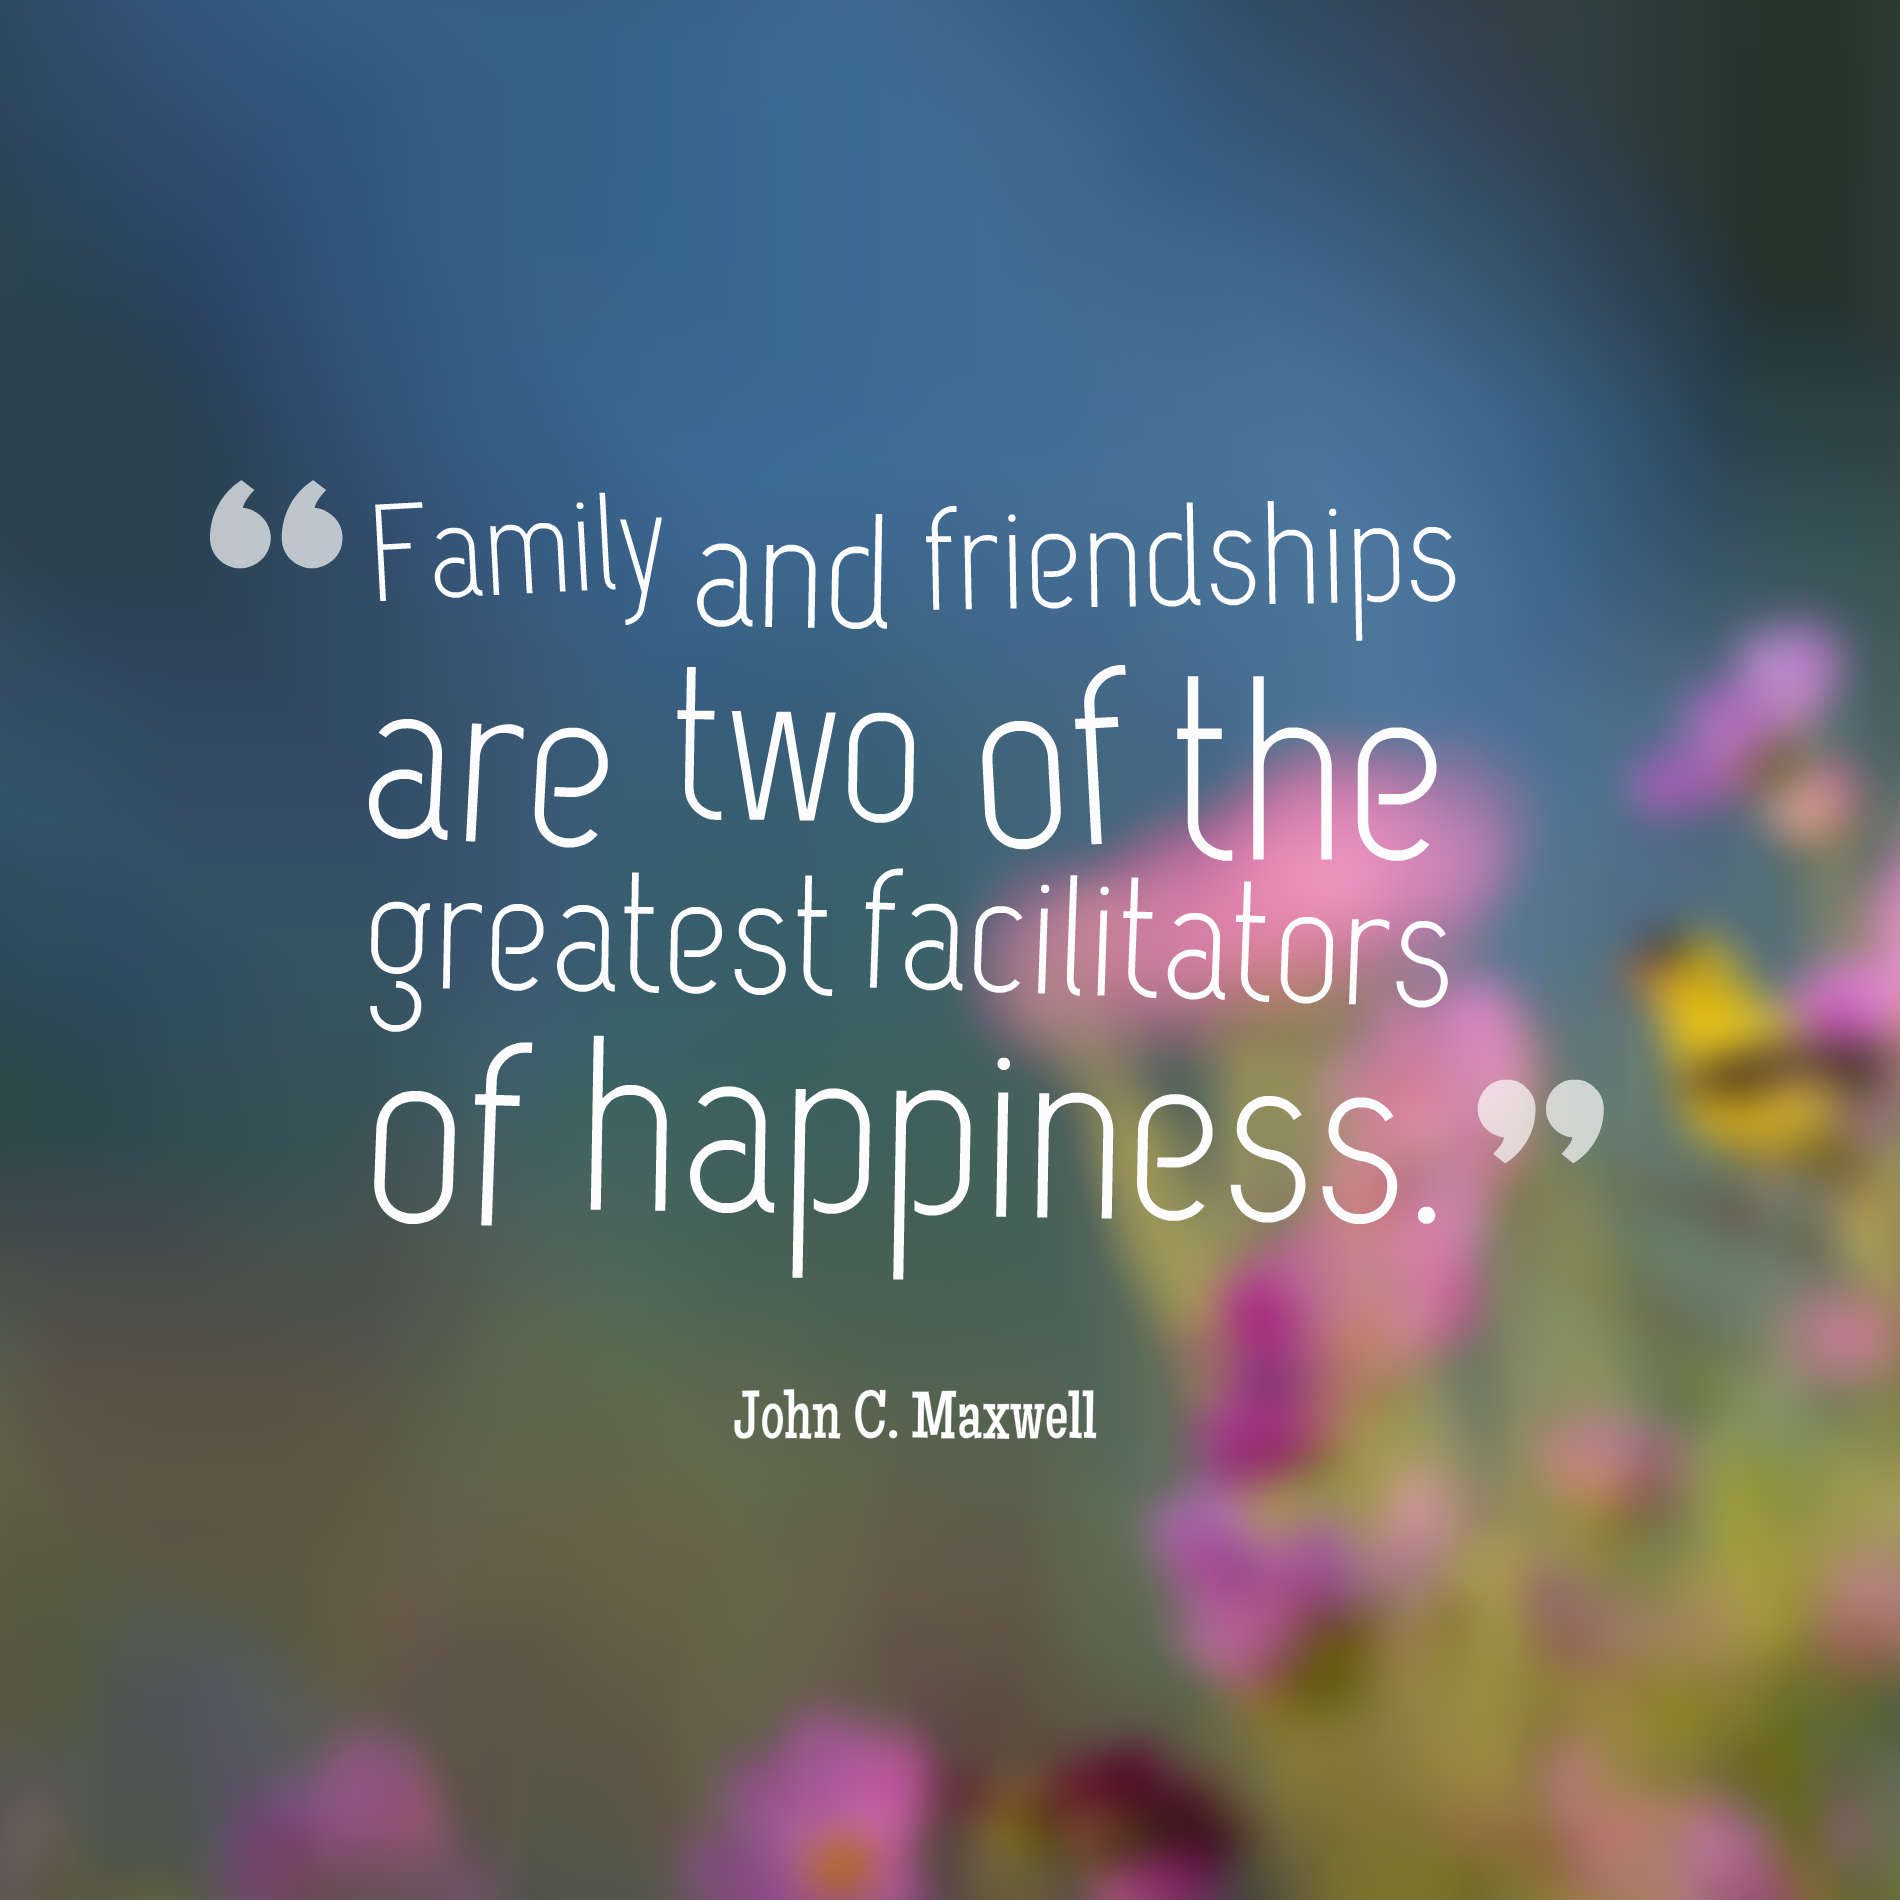 Family and friendships are two of the greatest facilitators of happiness.